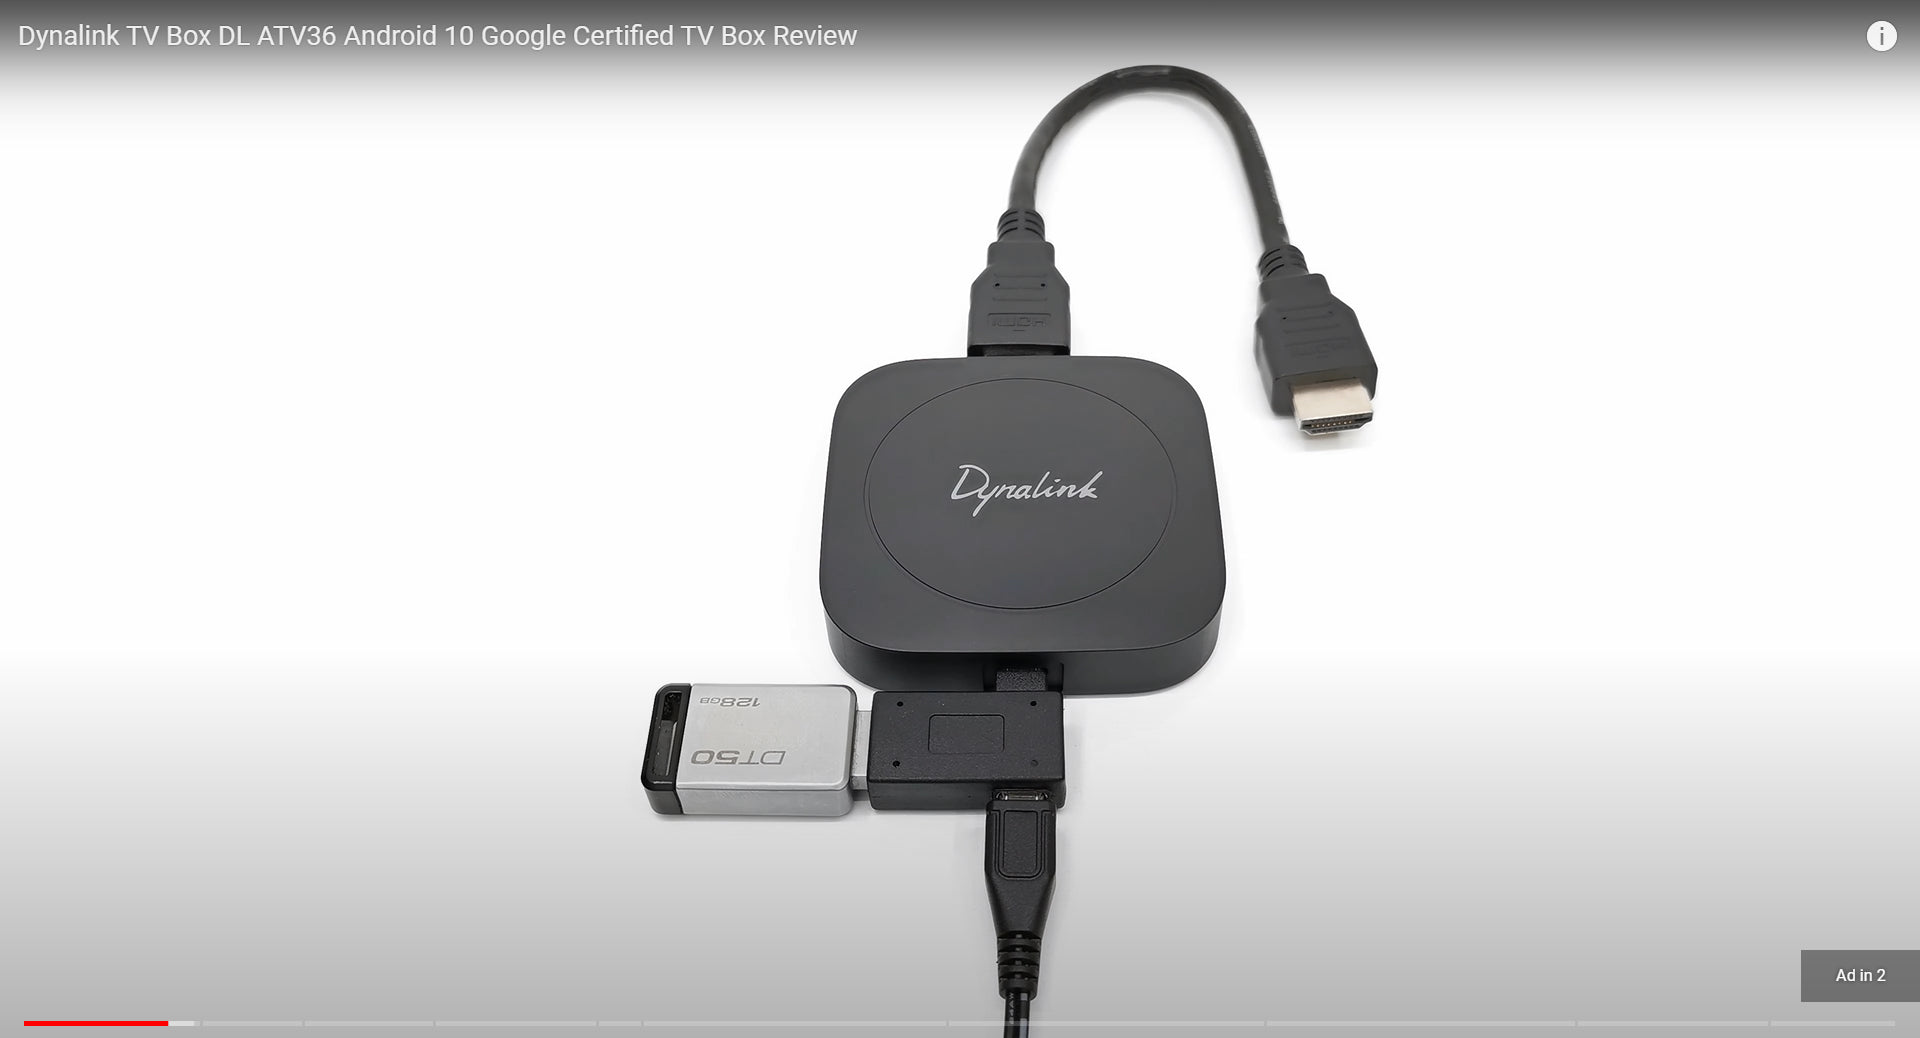 Dynalink TV Box DL ATV36 Android 10 Google Certified TV Box Review - Dynalink